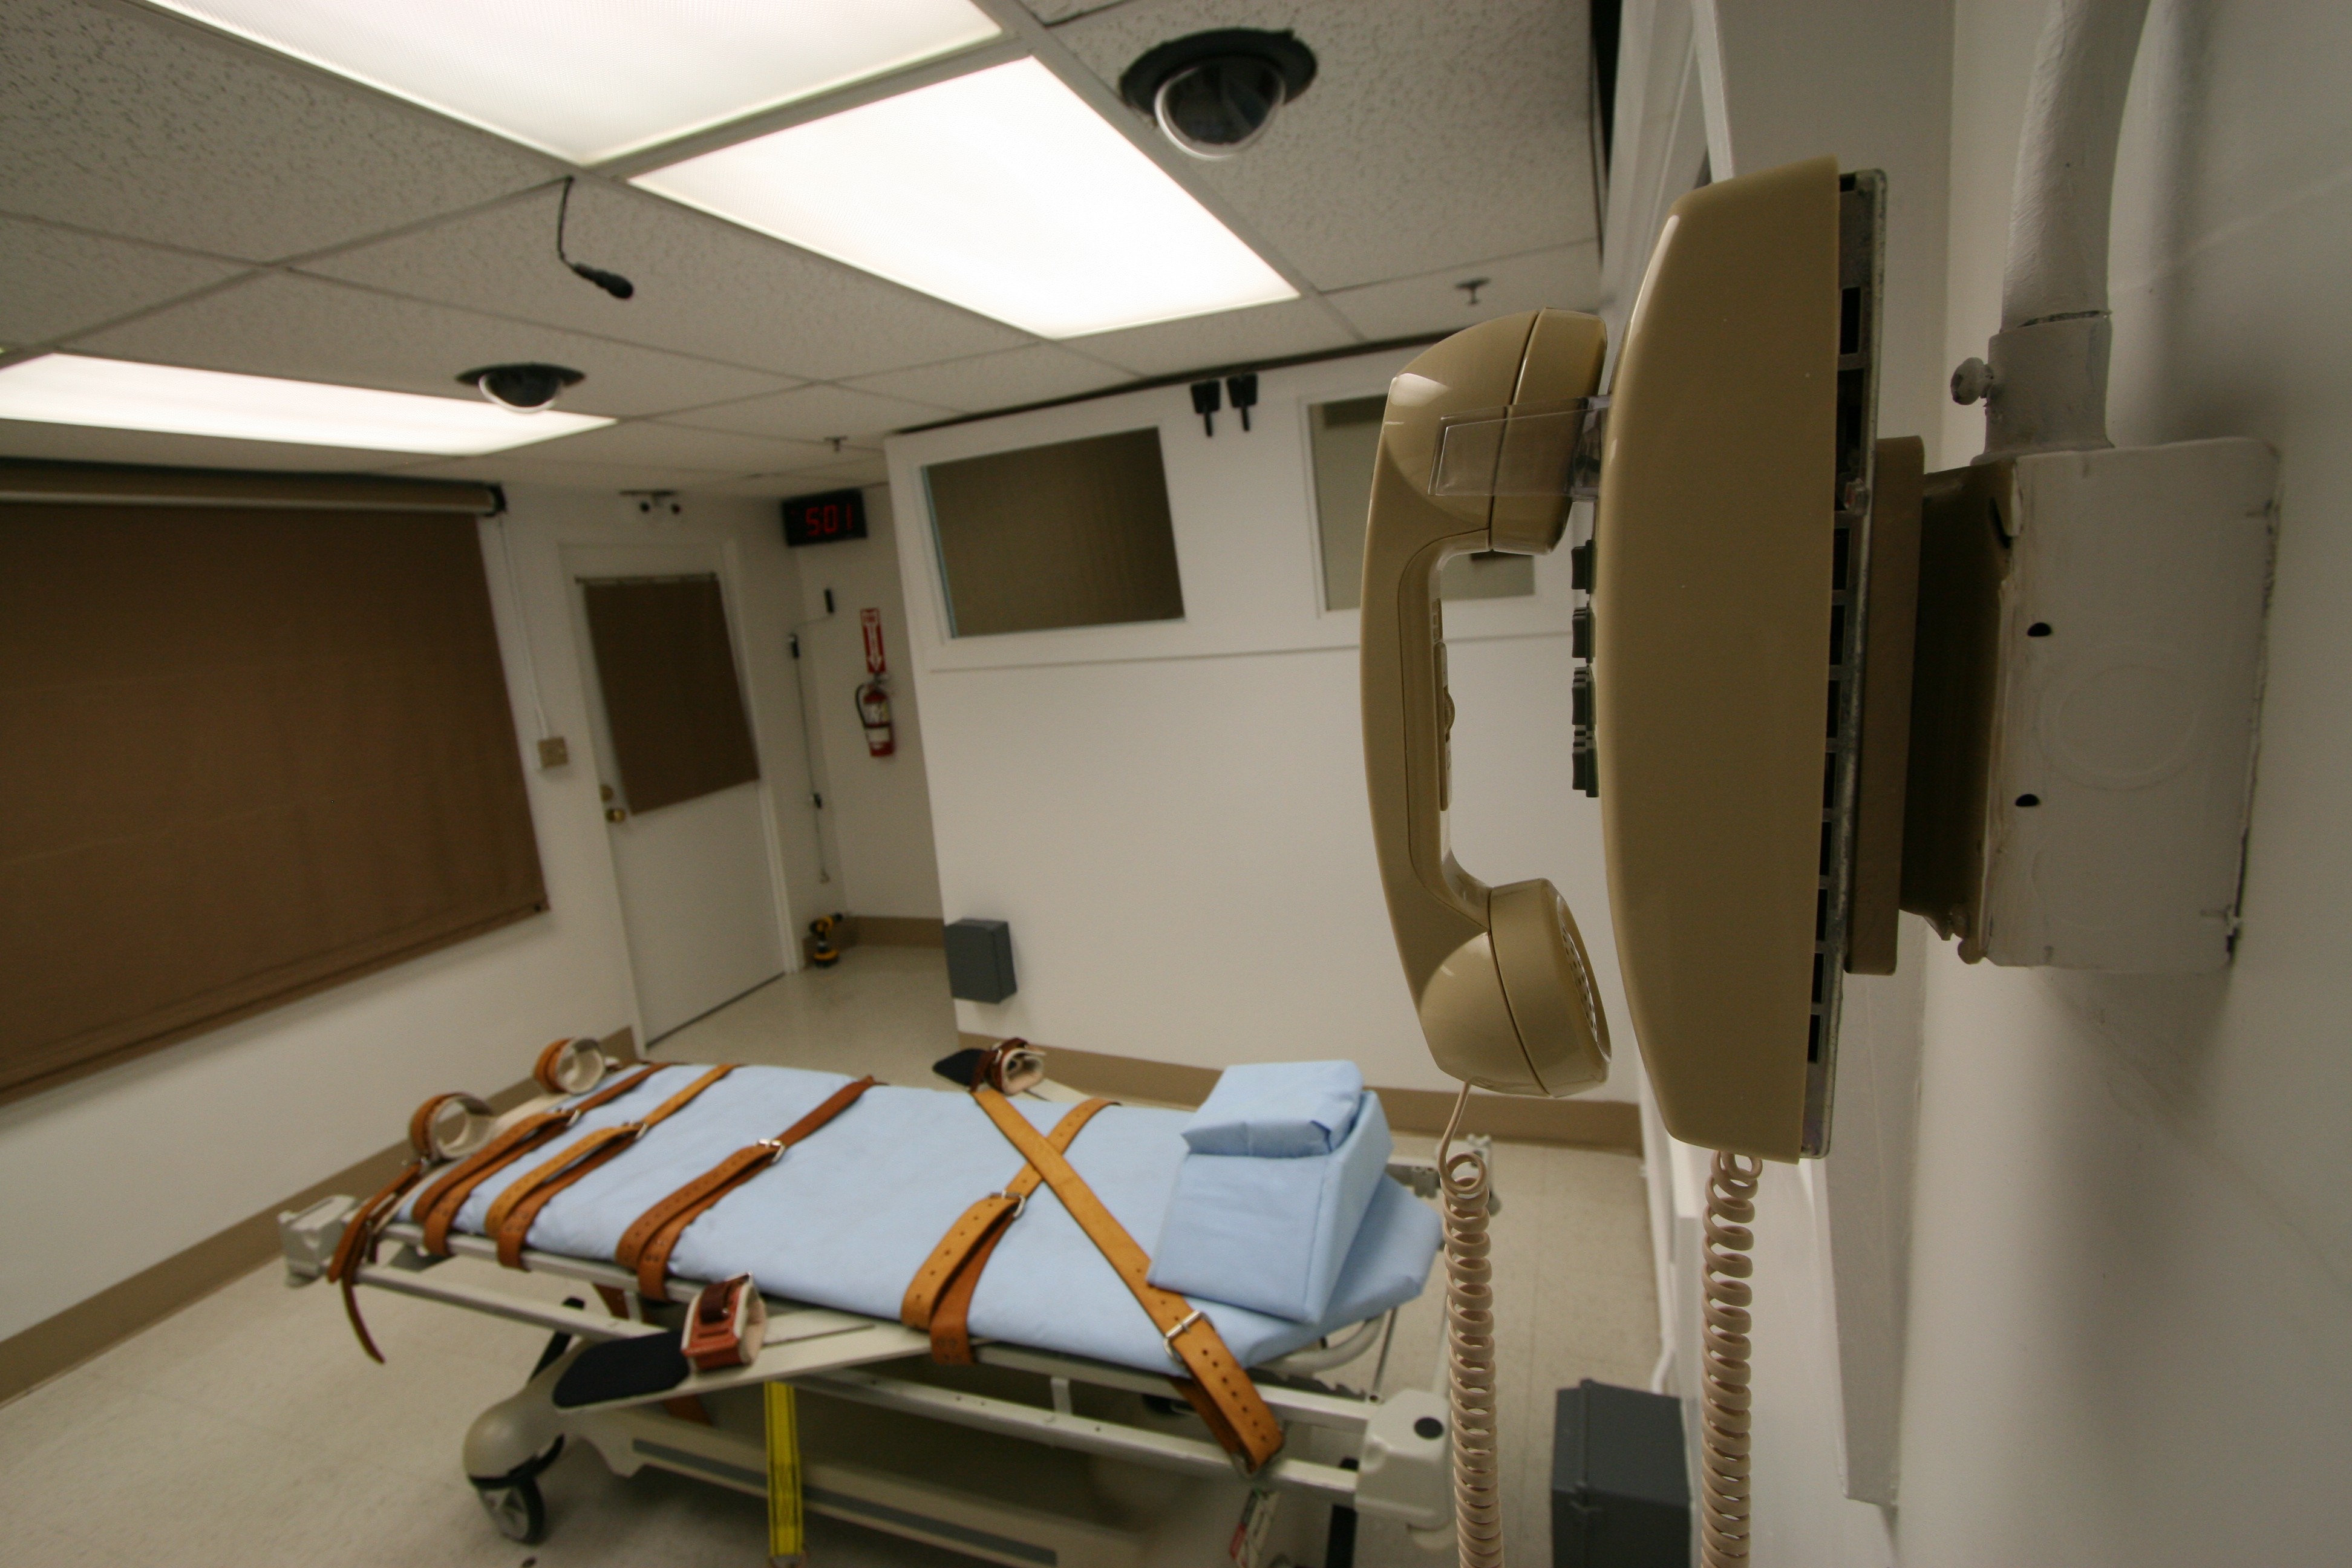 Push For Details On Florida S Lethal Injection Program Continues